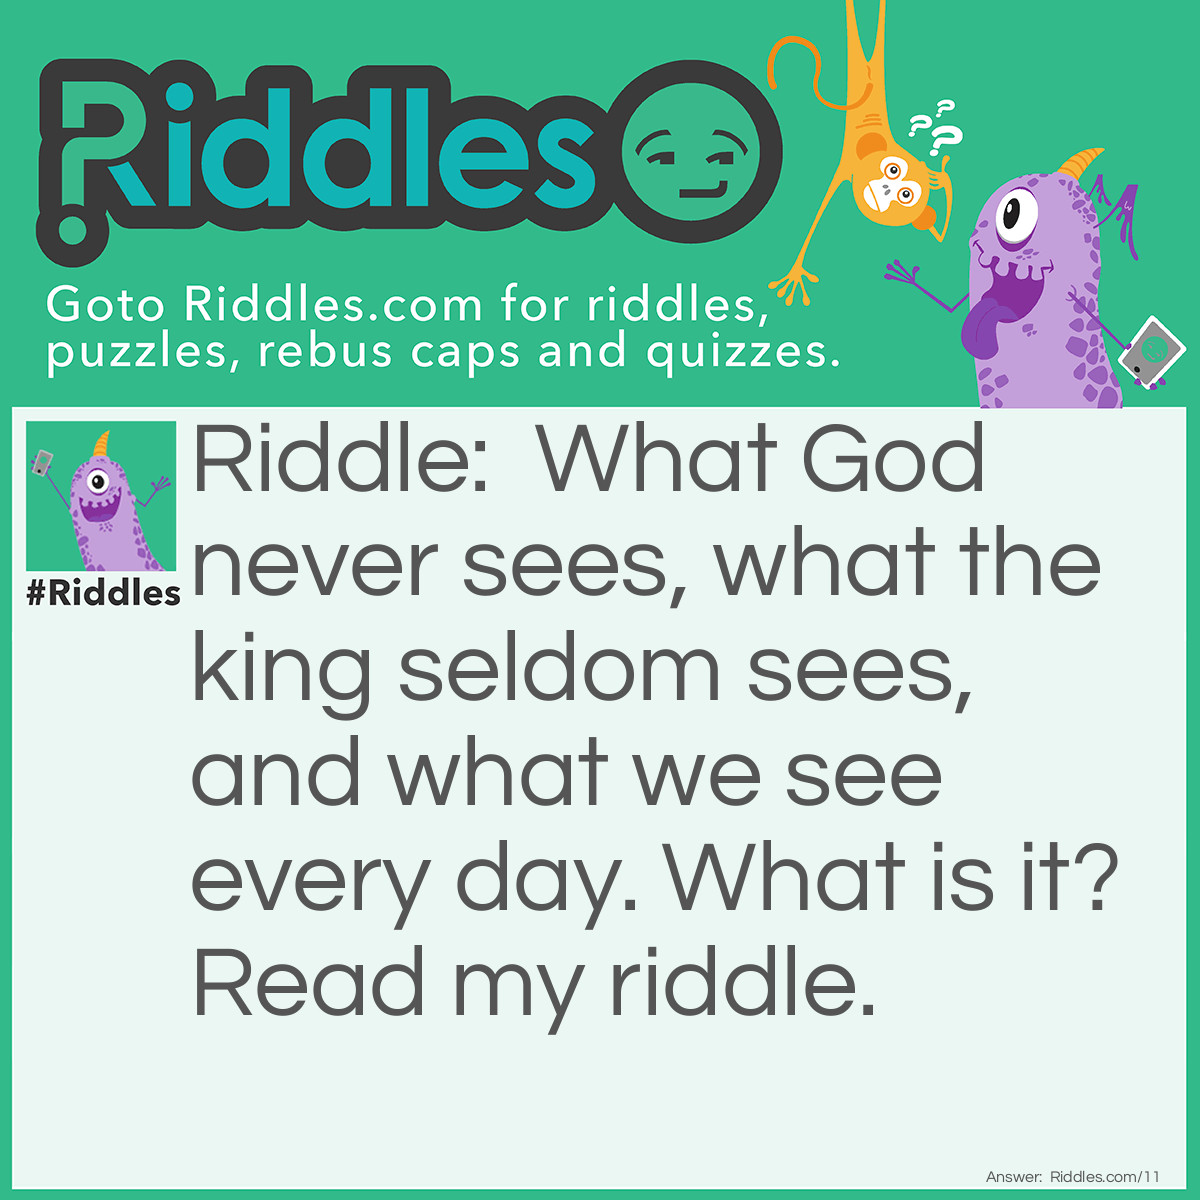 Riddle: Read my <a href="https://www.riddles.com">riddle</a>, I pray. What God never sees, what the king seldom sees, and what we see every day. What is it? Answer: An equal.